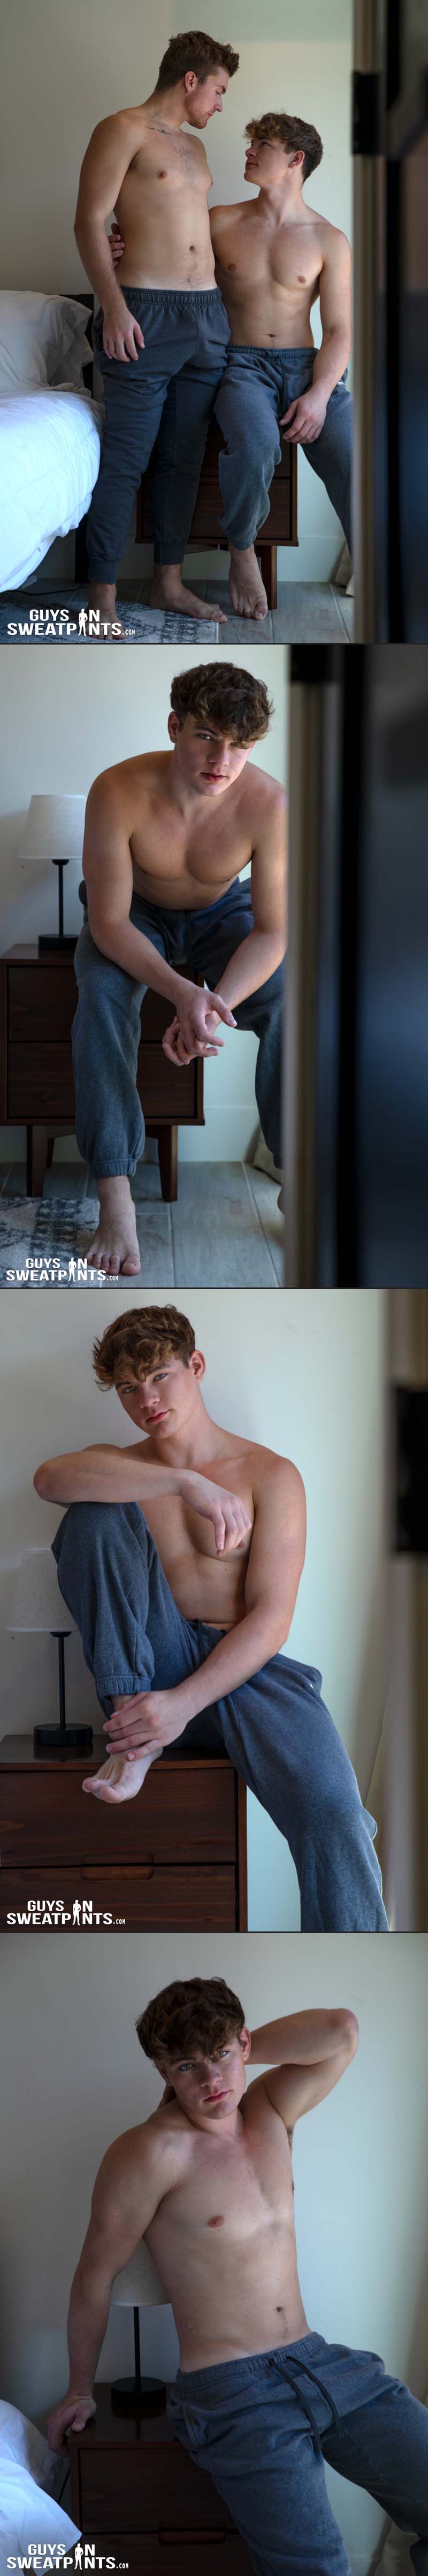 3 Loads For Oliver (Austin Wilde, Carter Collins and Oliver Marks) at Guys In Sweatpants